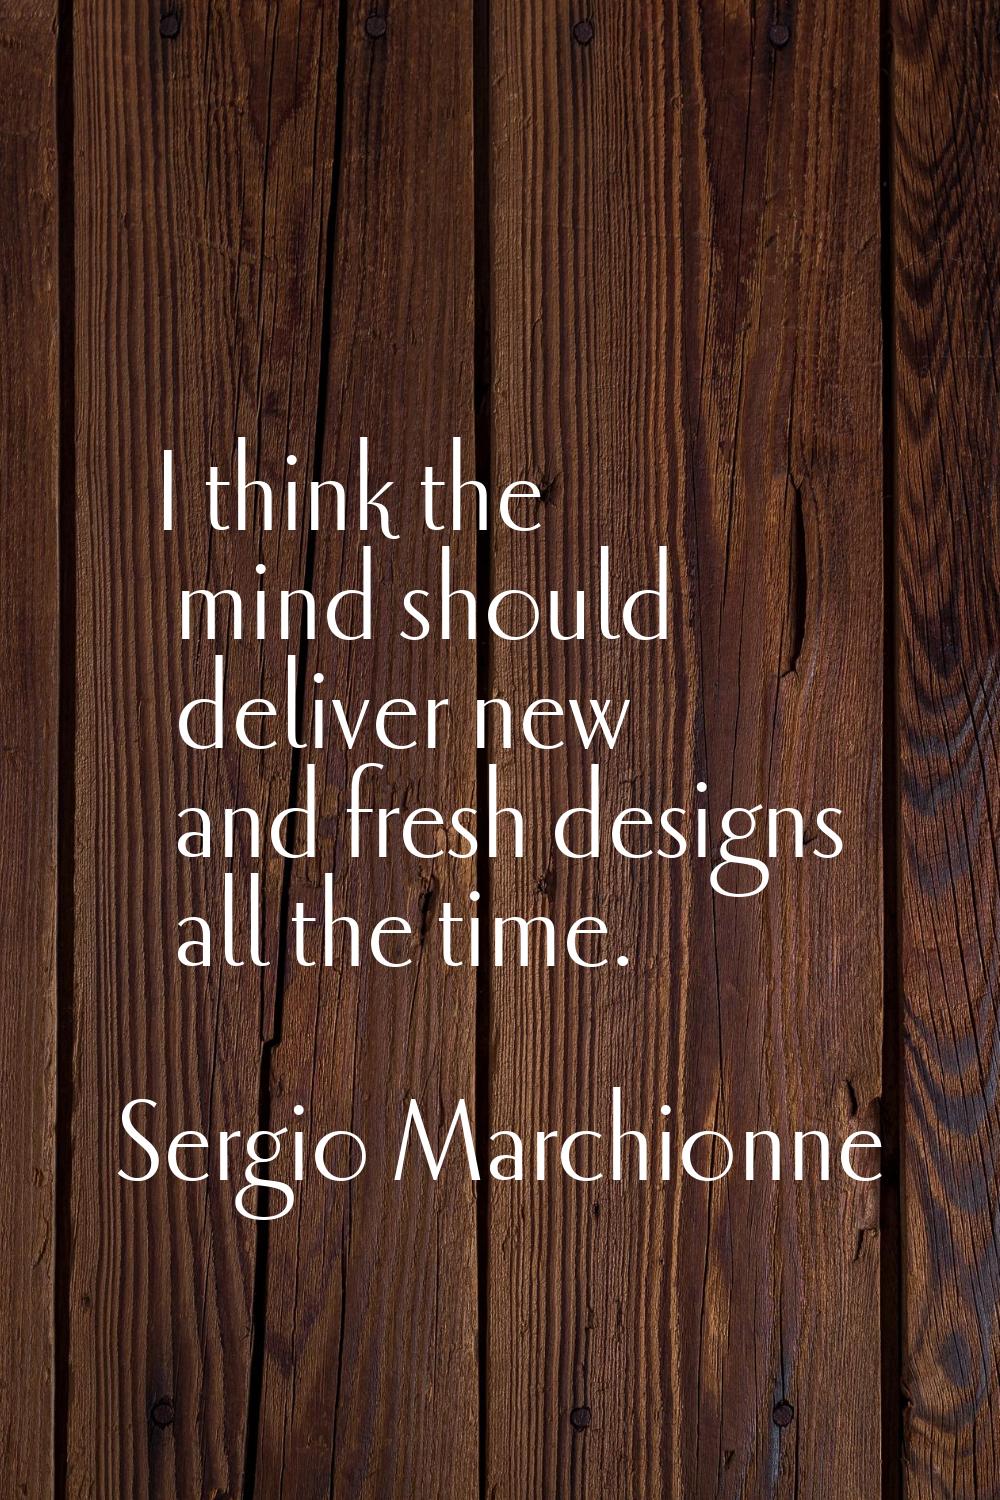 I think the mind should deliver new and fresh designs all the time.